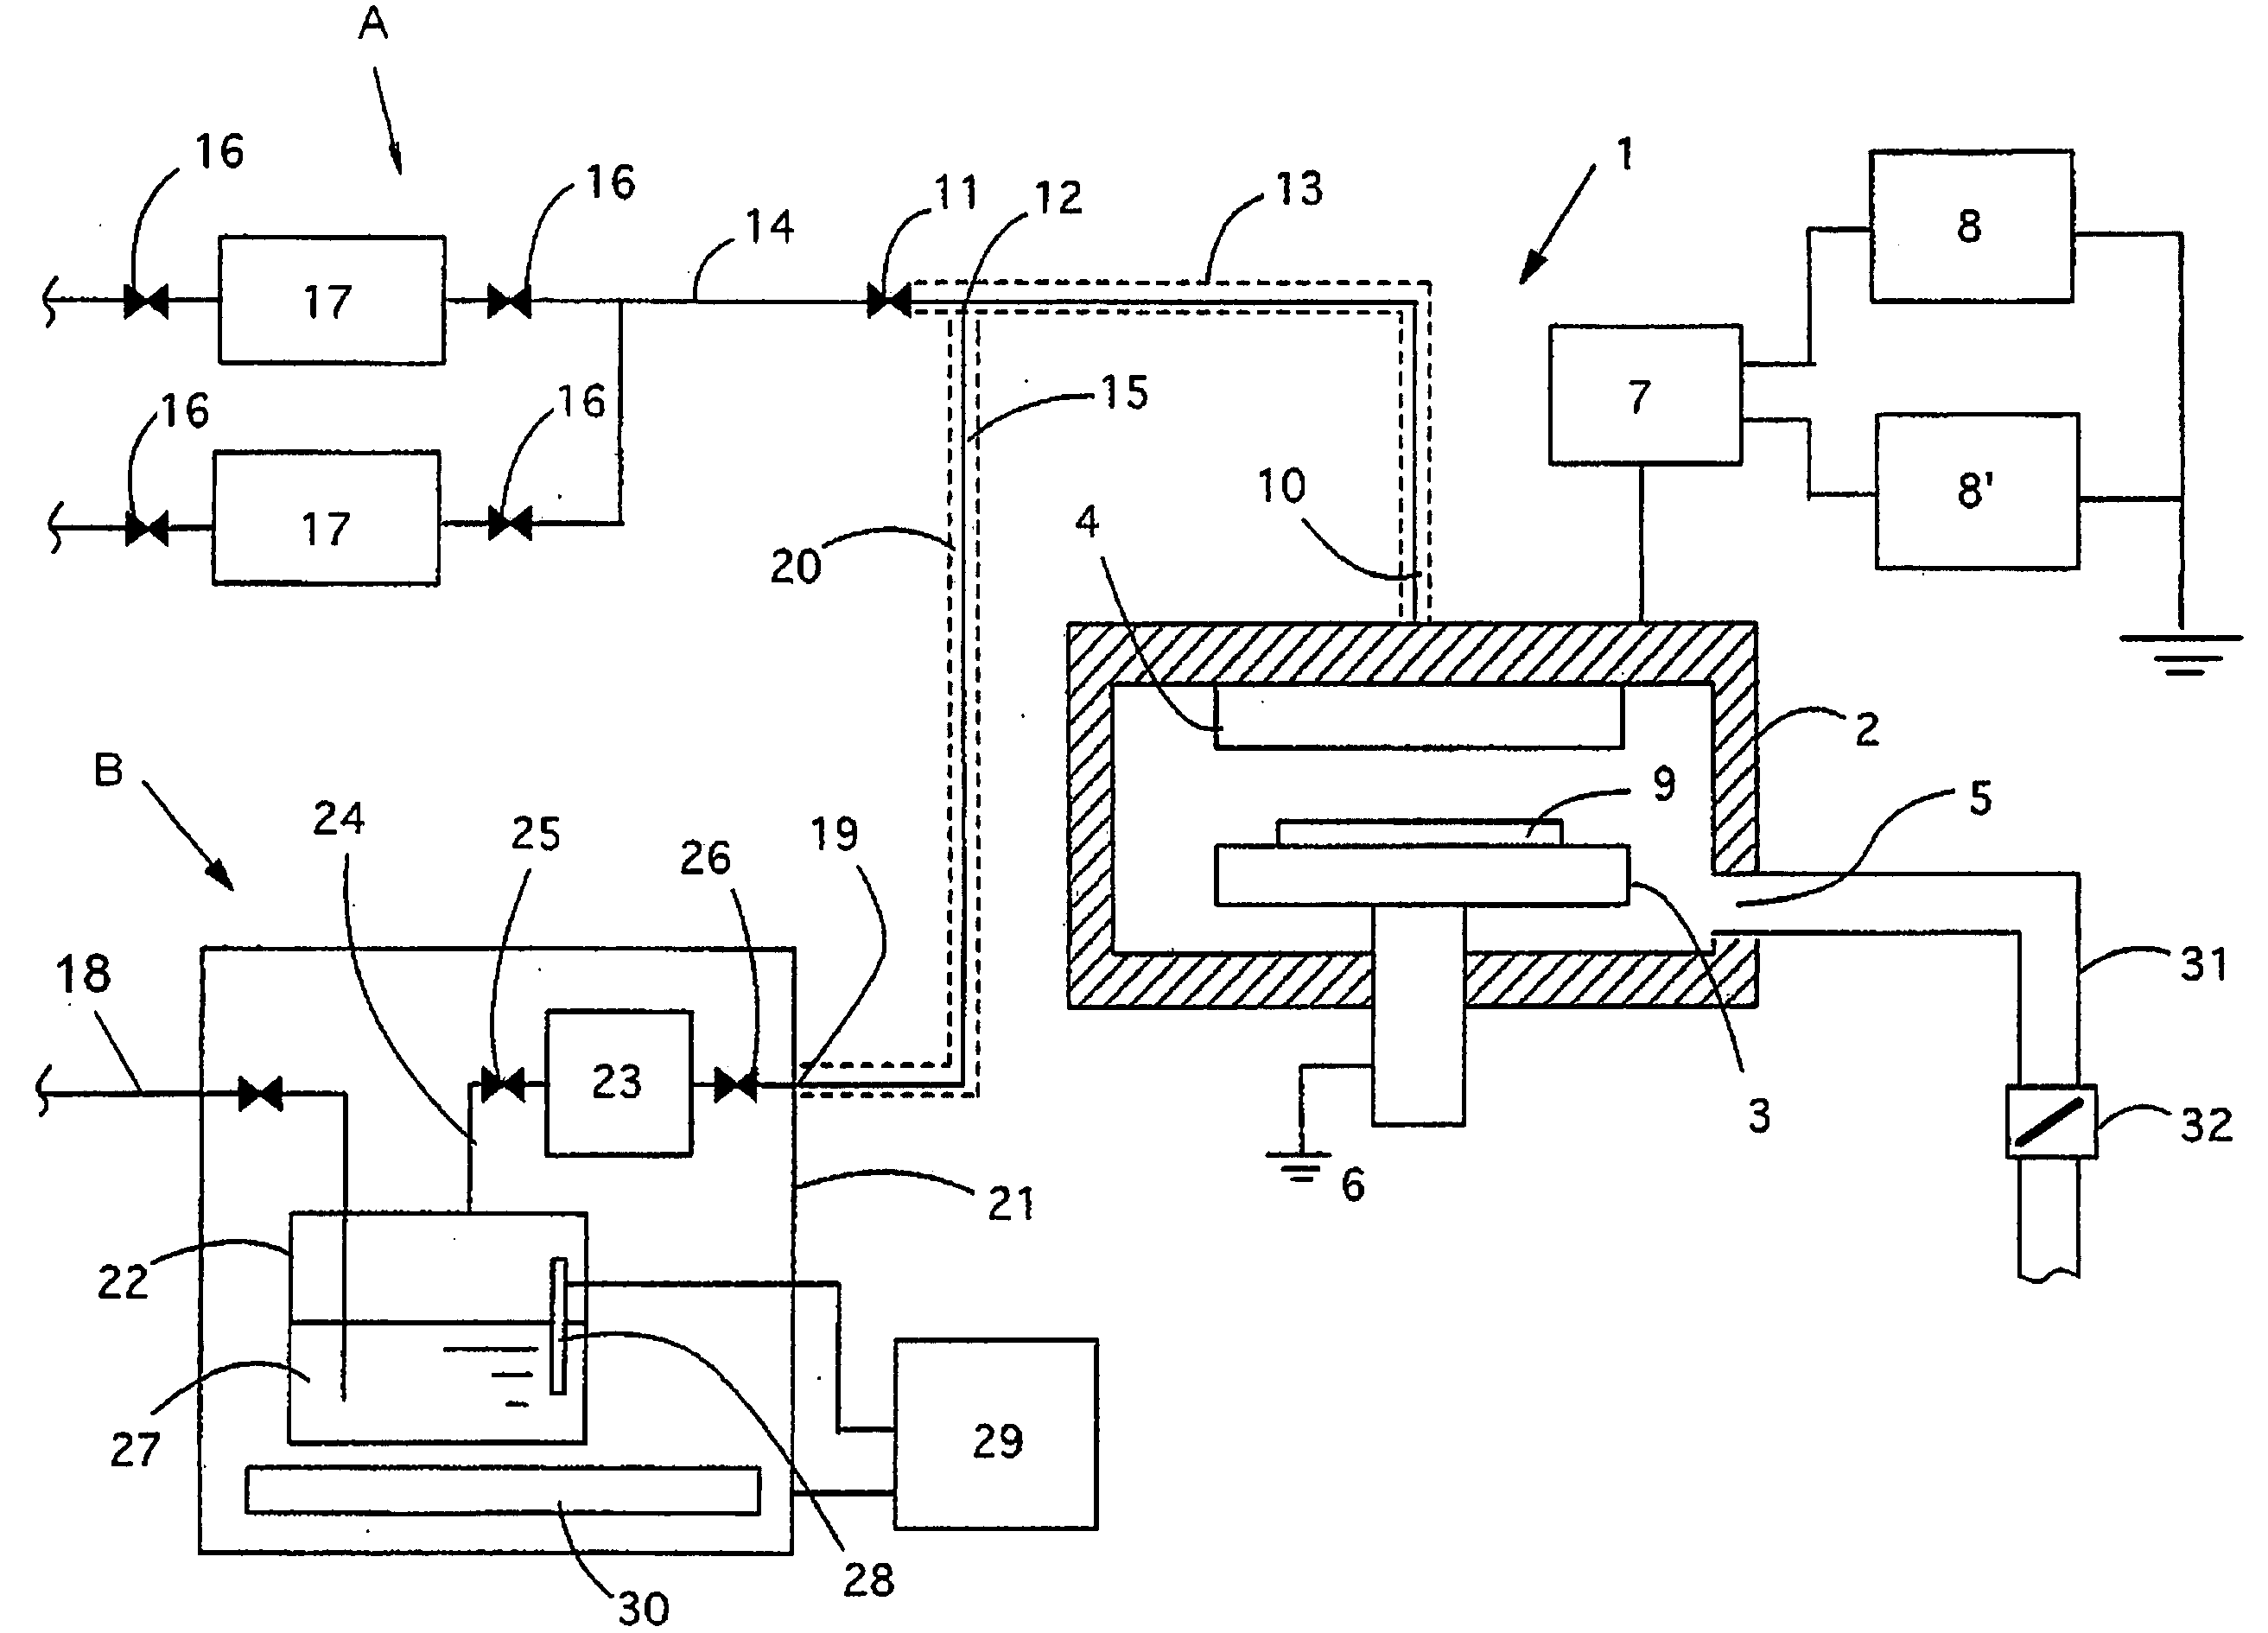 Source gas flow control and CVD using same